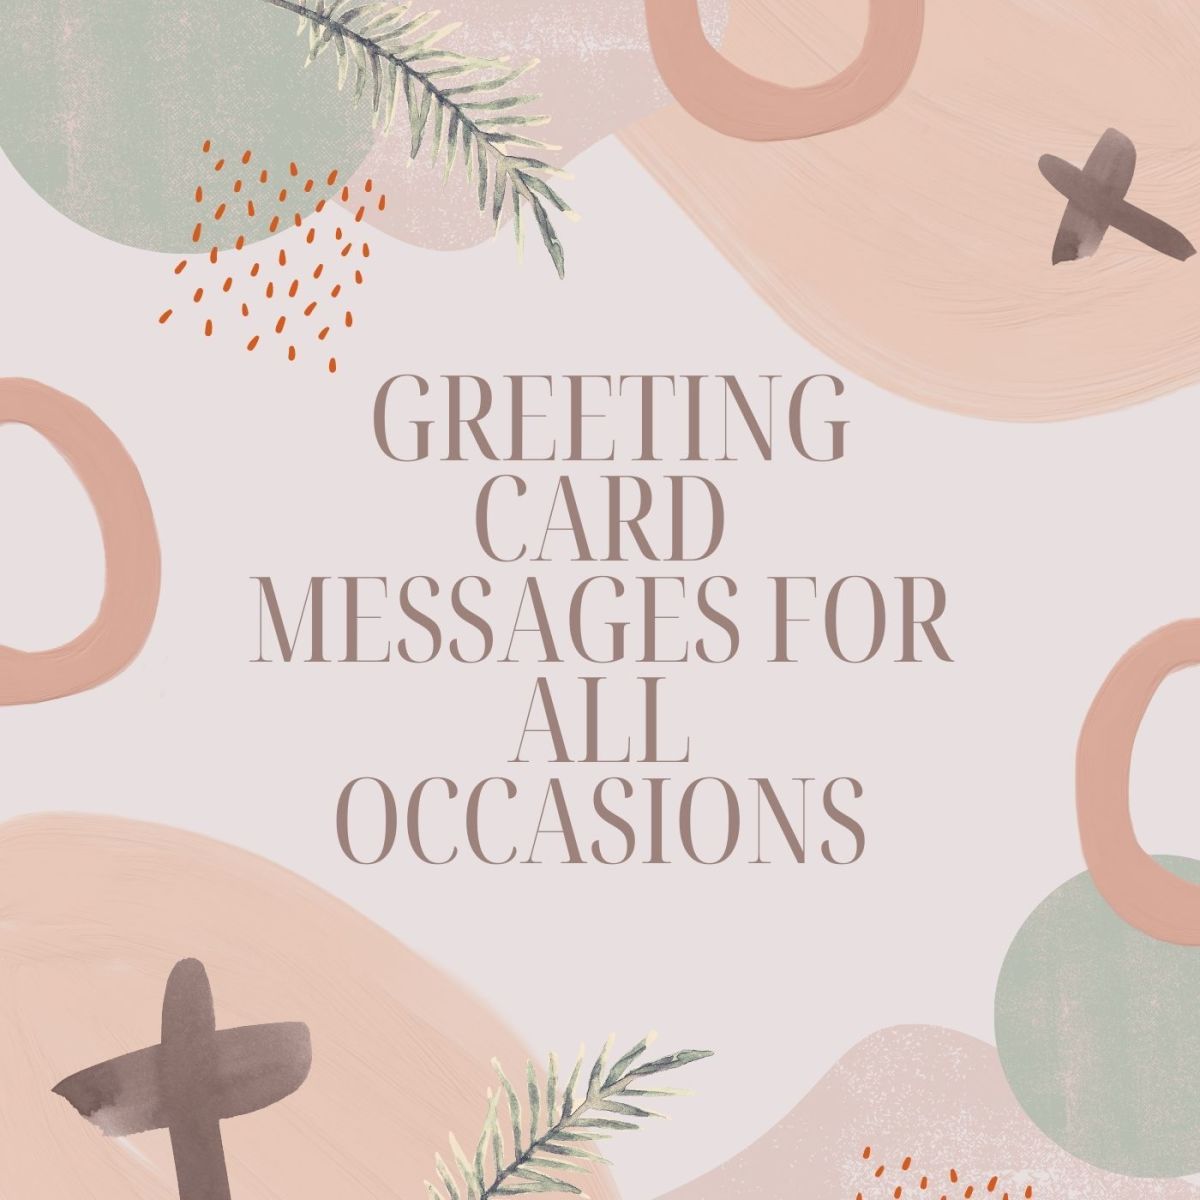 Sample Greeting Card Messages and Wishes for All Occasions